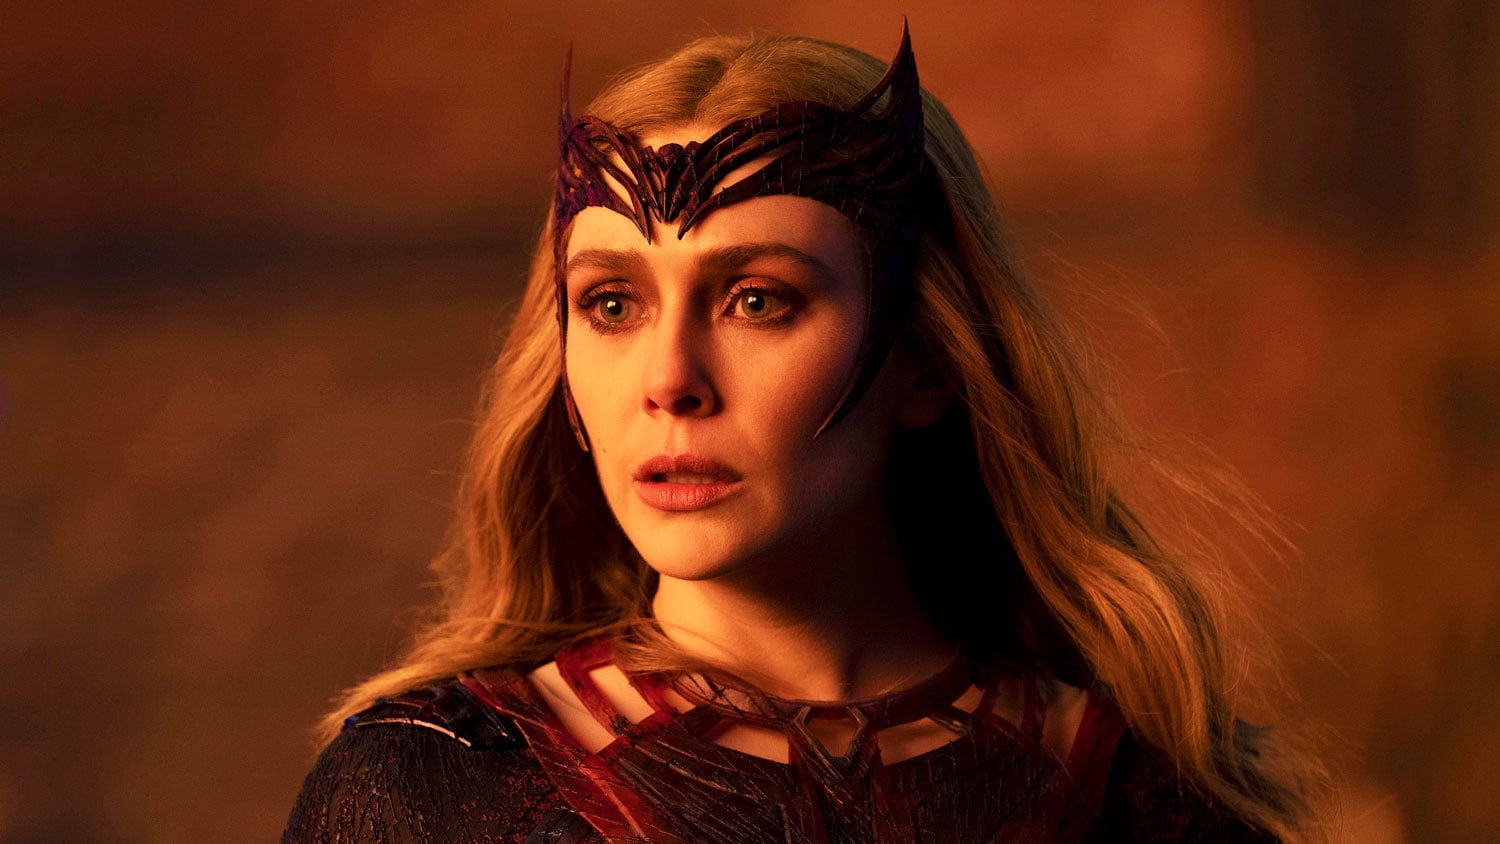 Elizabeth-Olsen-Expects-To-Return-As-Scarlet-Witch-In-The-MCU